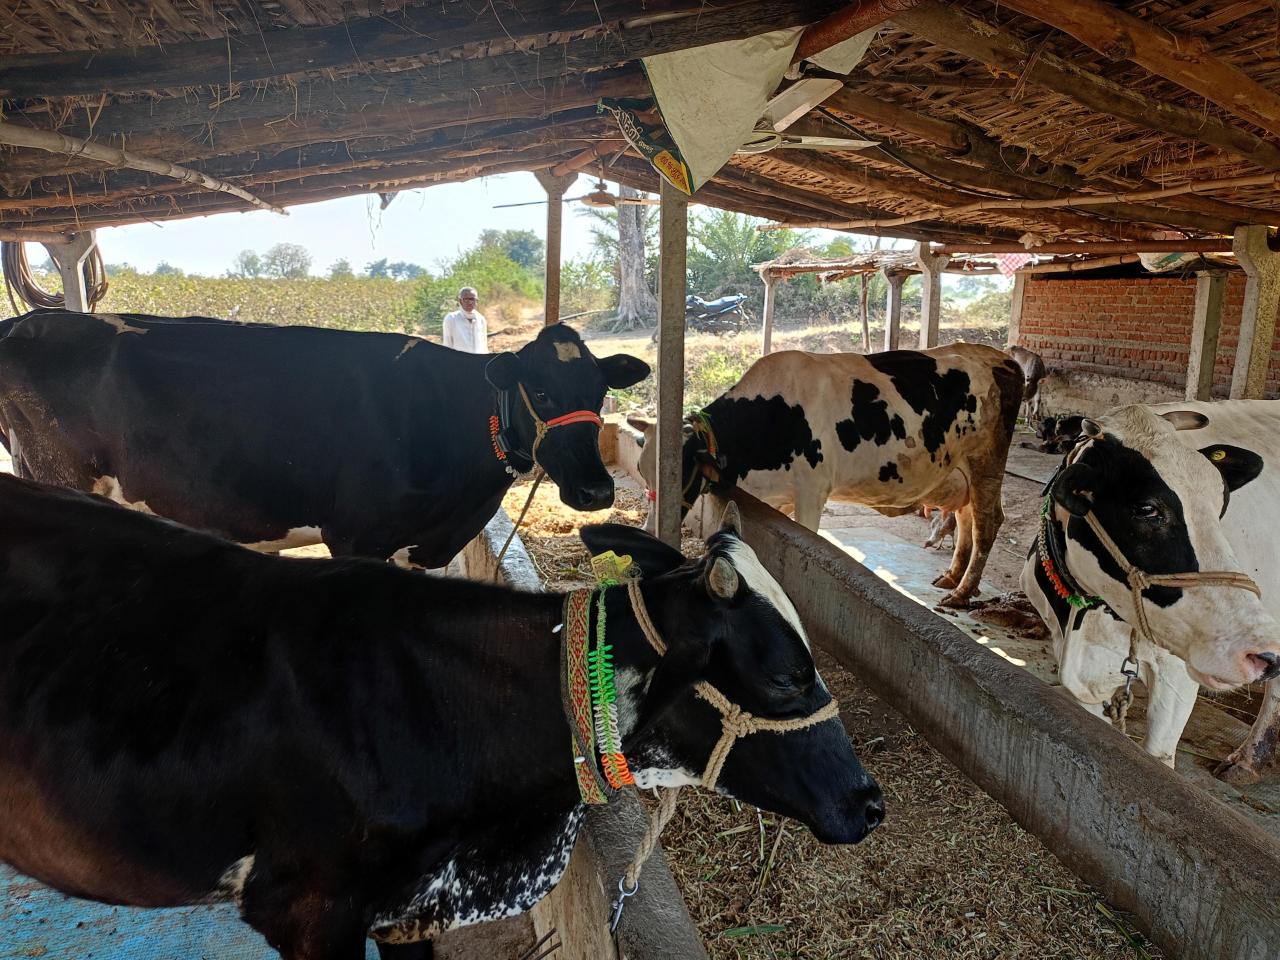 With the use of IoT-enabled devices and generative AI, farmers can improve the health and production of their livestock